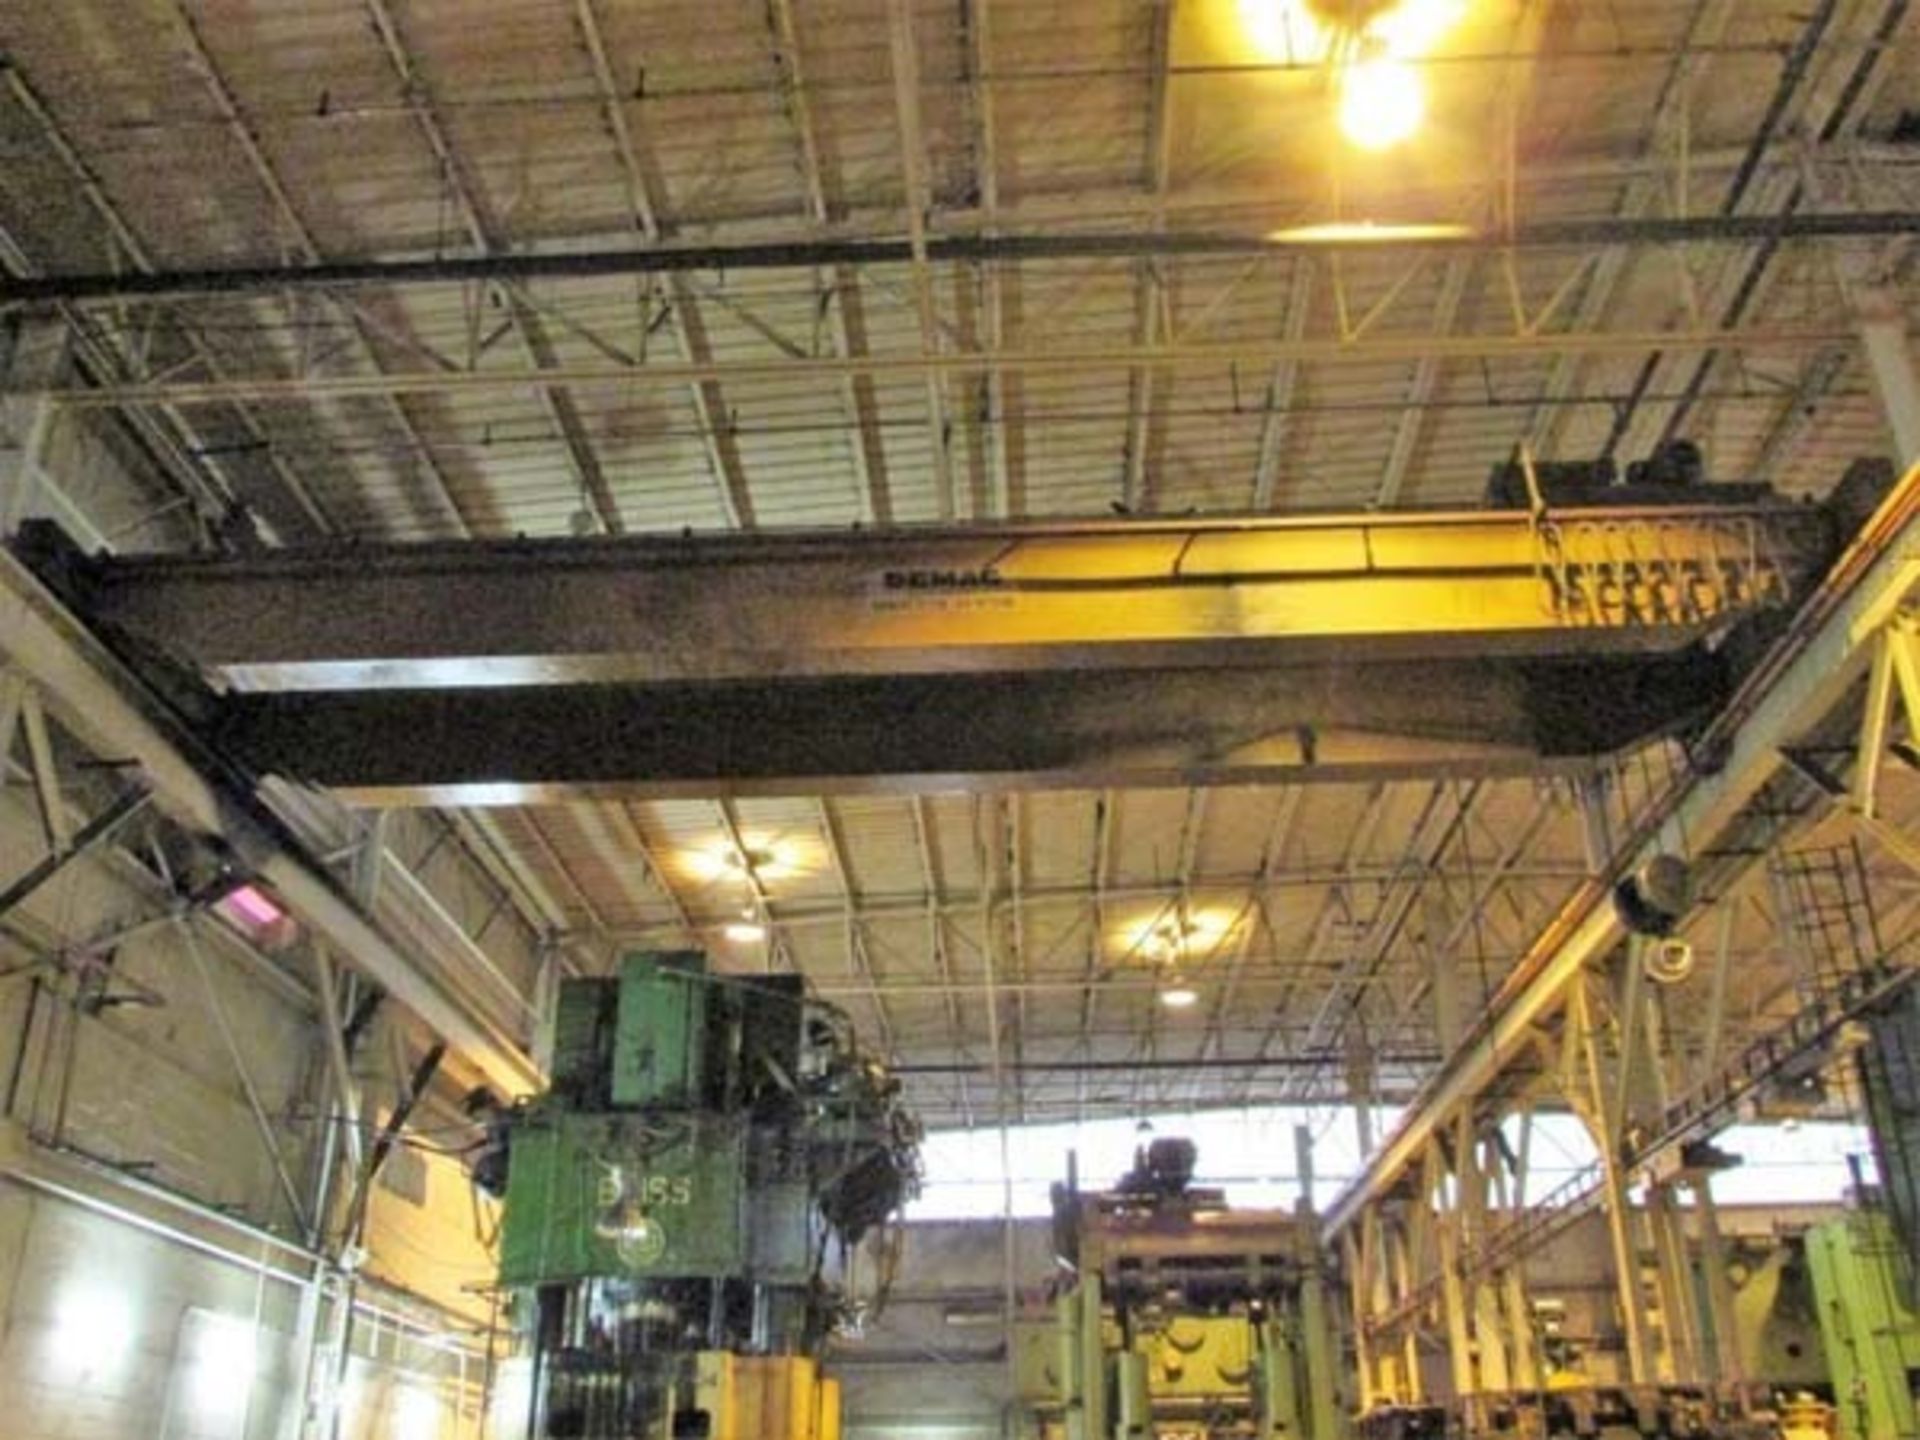 1984 Demag Top Riding Double Girder Bridge Crane, 25 Ton x 50', Mdl: N/A, S/N: 75066, Located In: - Image 2 of 9